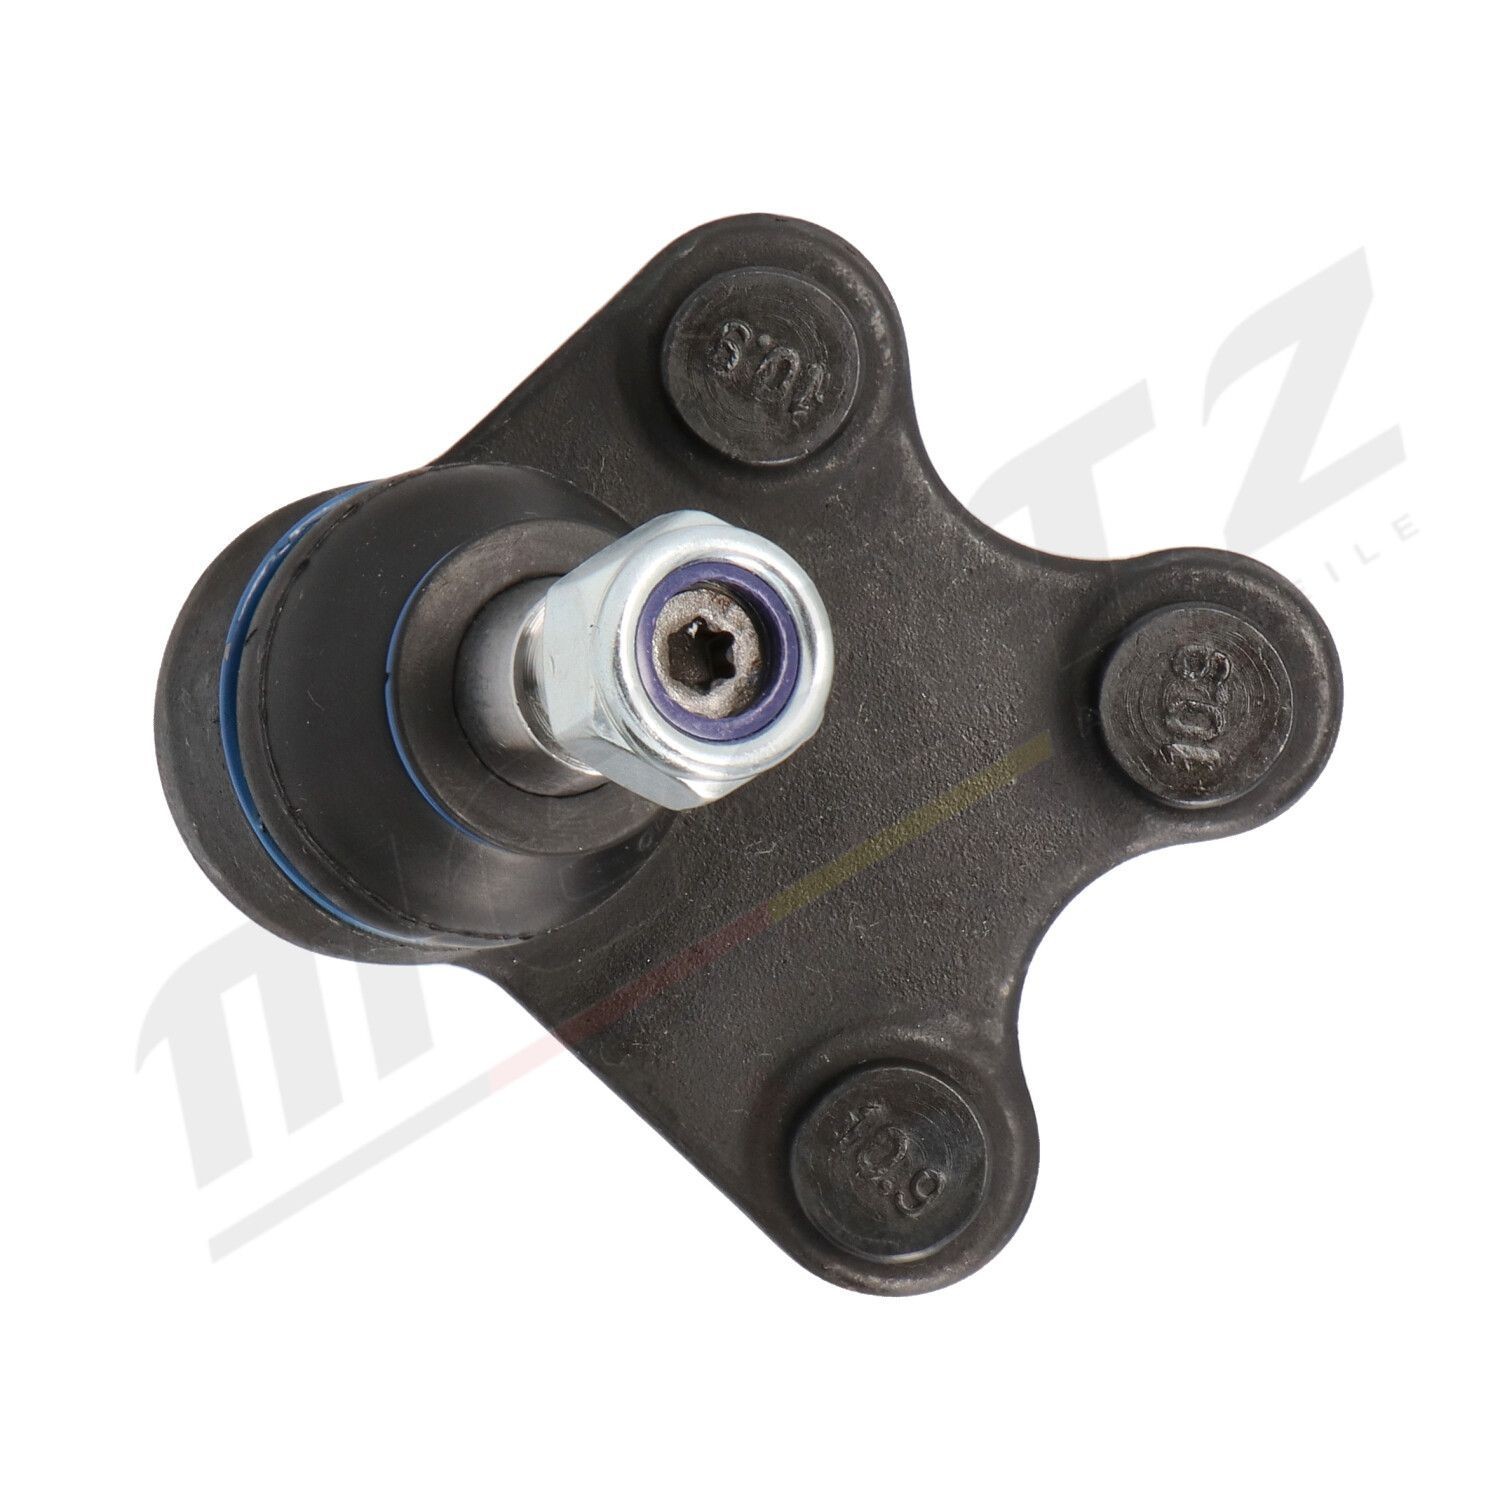 MERTZ M-S0871 Ball Joint Front Axle Left, with nut, with bolts/screws, 18,2mm, M12x1,5, M10x1,5mm